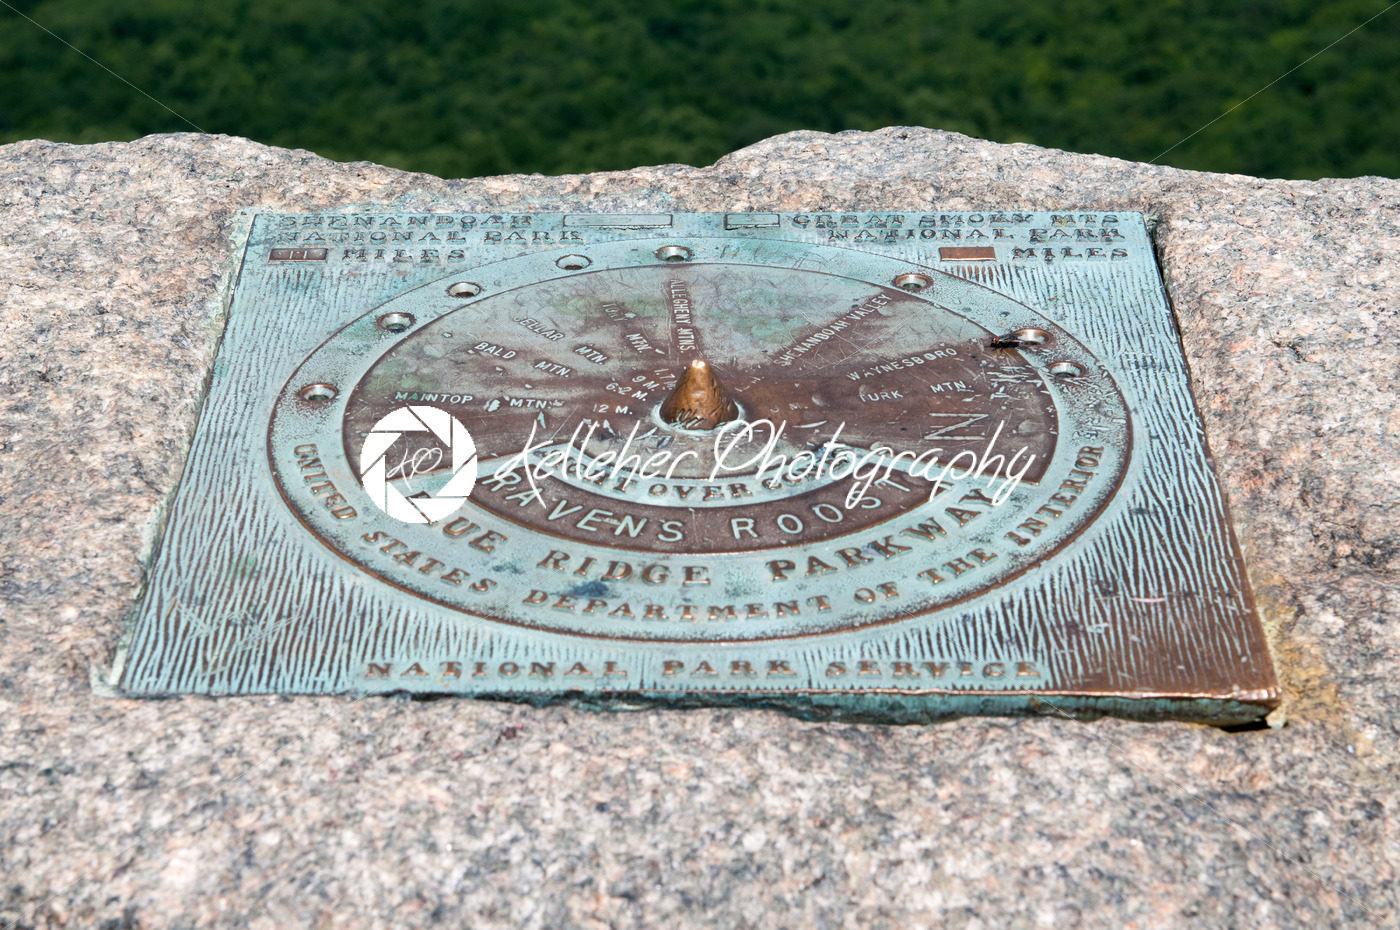 Raven’s Roost Overlook, Blue Ridge Parkway Mountains - Kelleher Photography Store